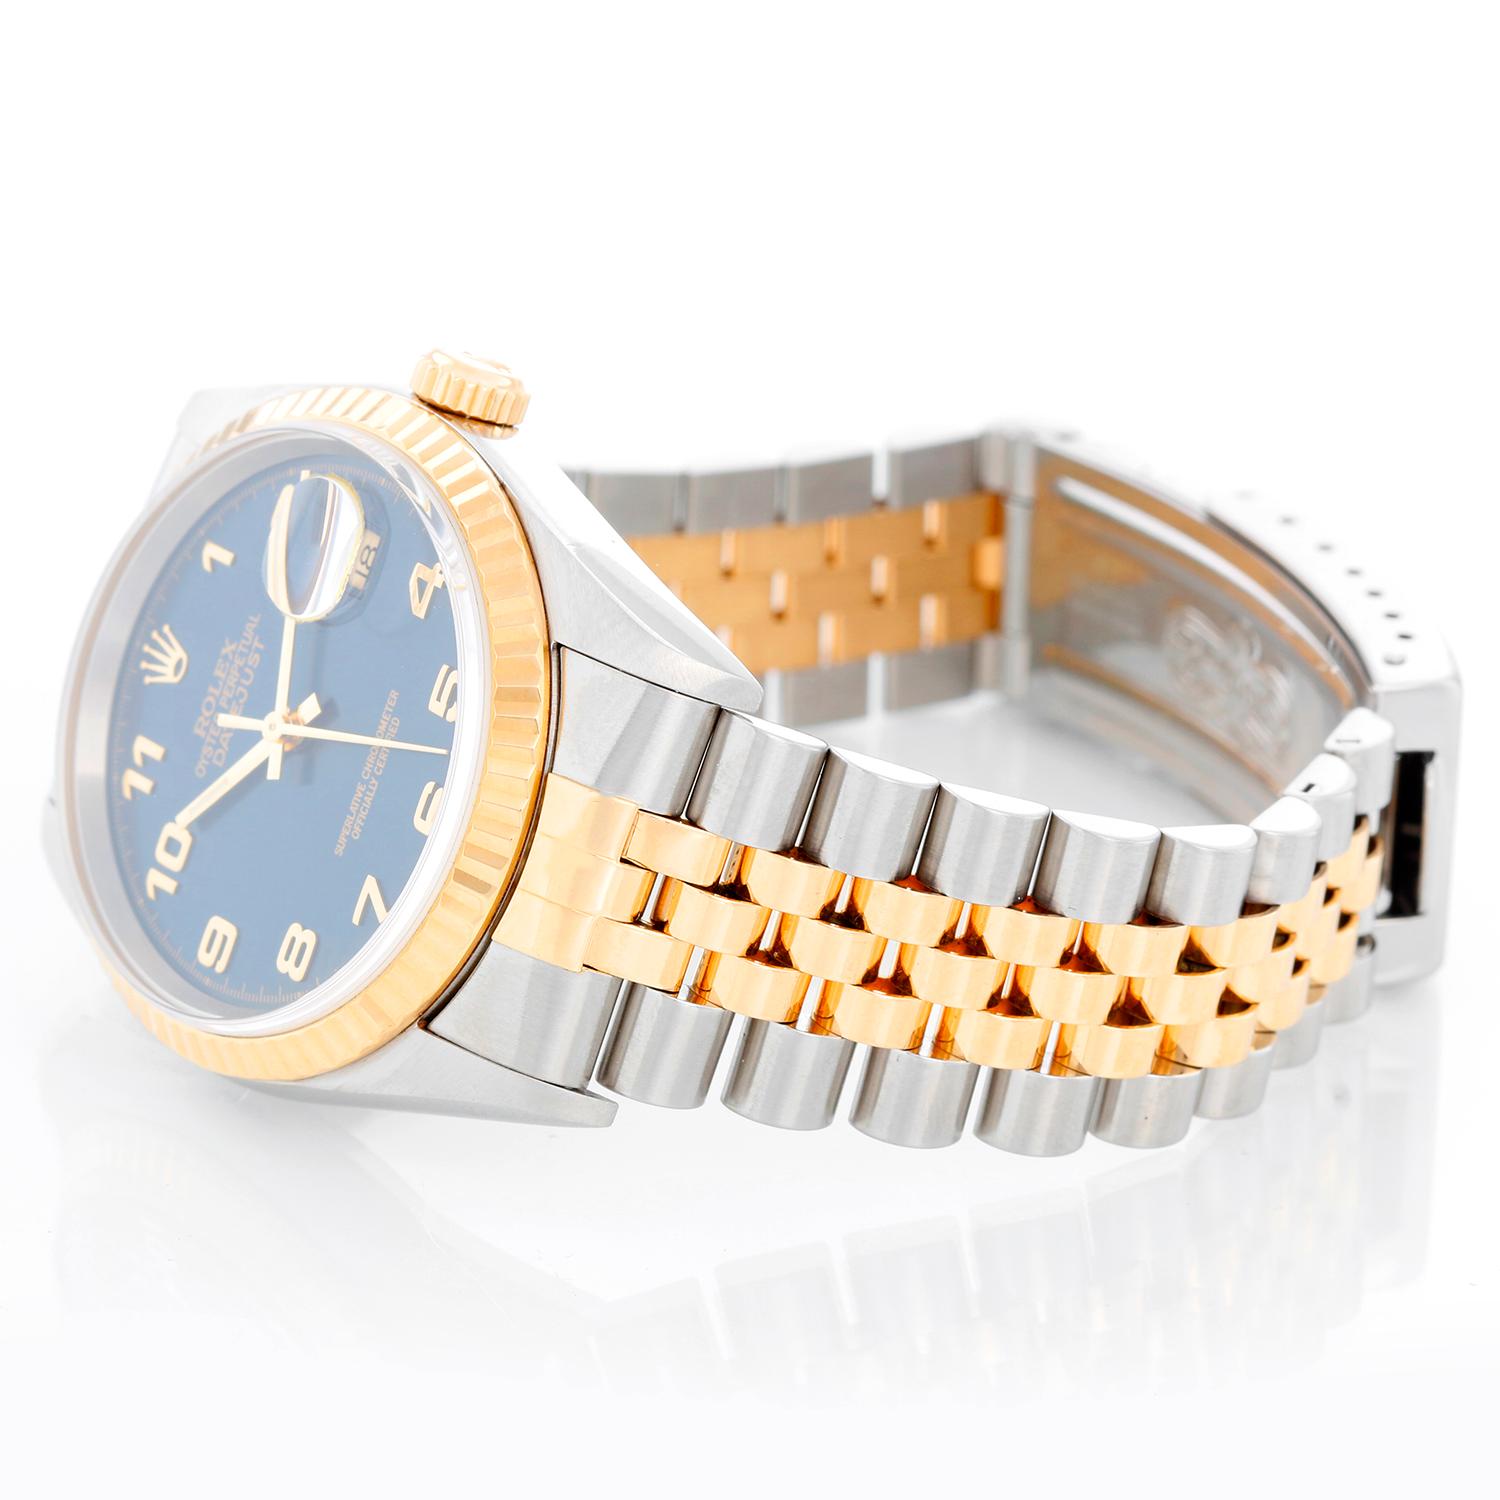 Rolex Datejust 2-Tone Men's Steel & Gold Watch 16233 - Automatic winding, Quickset, sapphire crystal. Stainless steel case with yellow gold bezel (36mm diameter). Blue dial with Arabic numerals . Stainless steel and 18k yellow gold Jubilee bracelet.